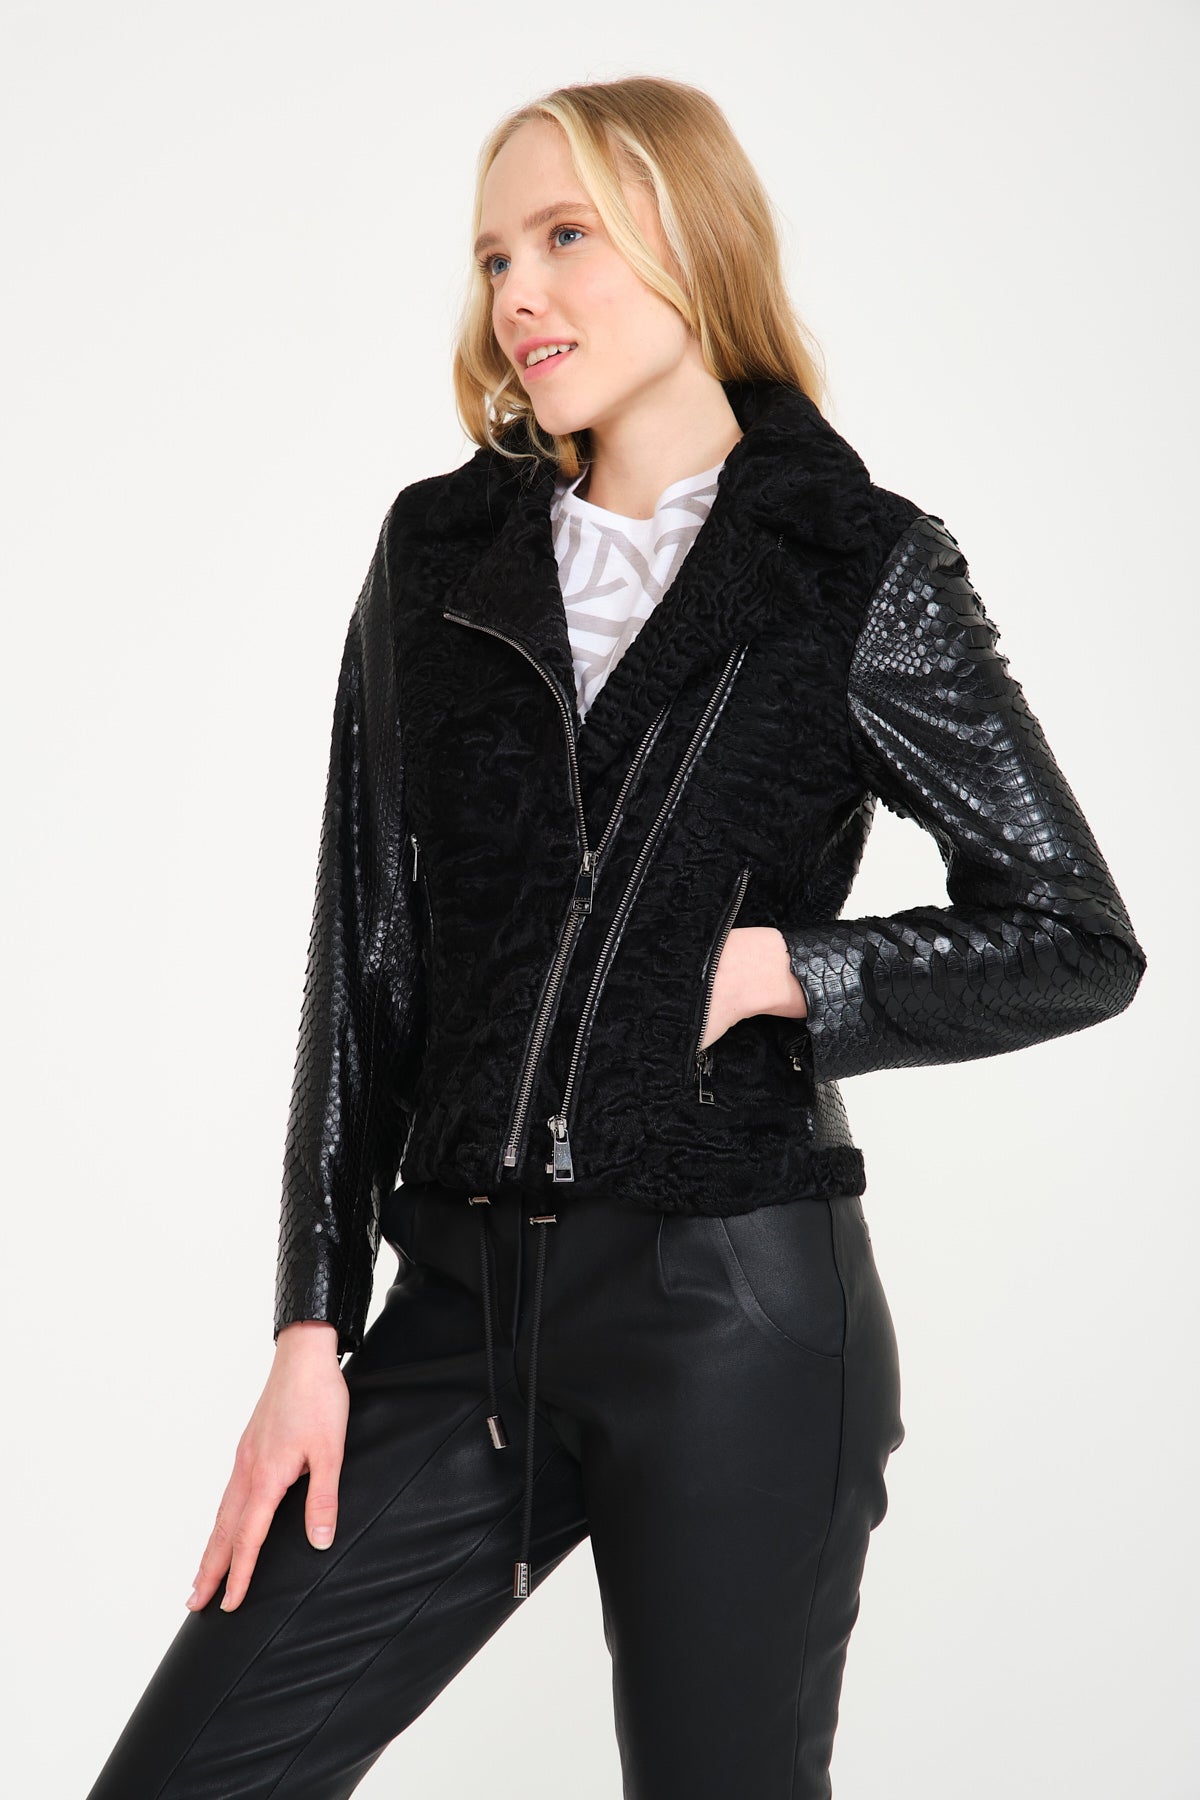 Long-lasting, Durable Women's Leather Jacket Models are on 